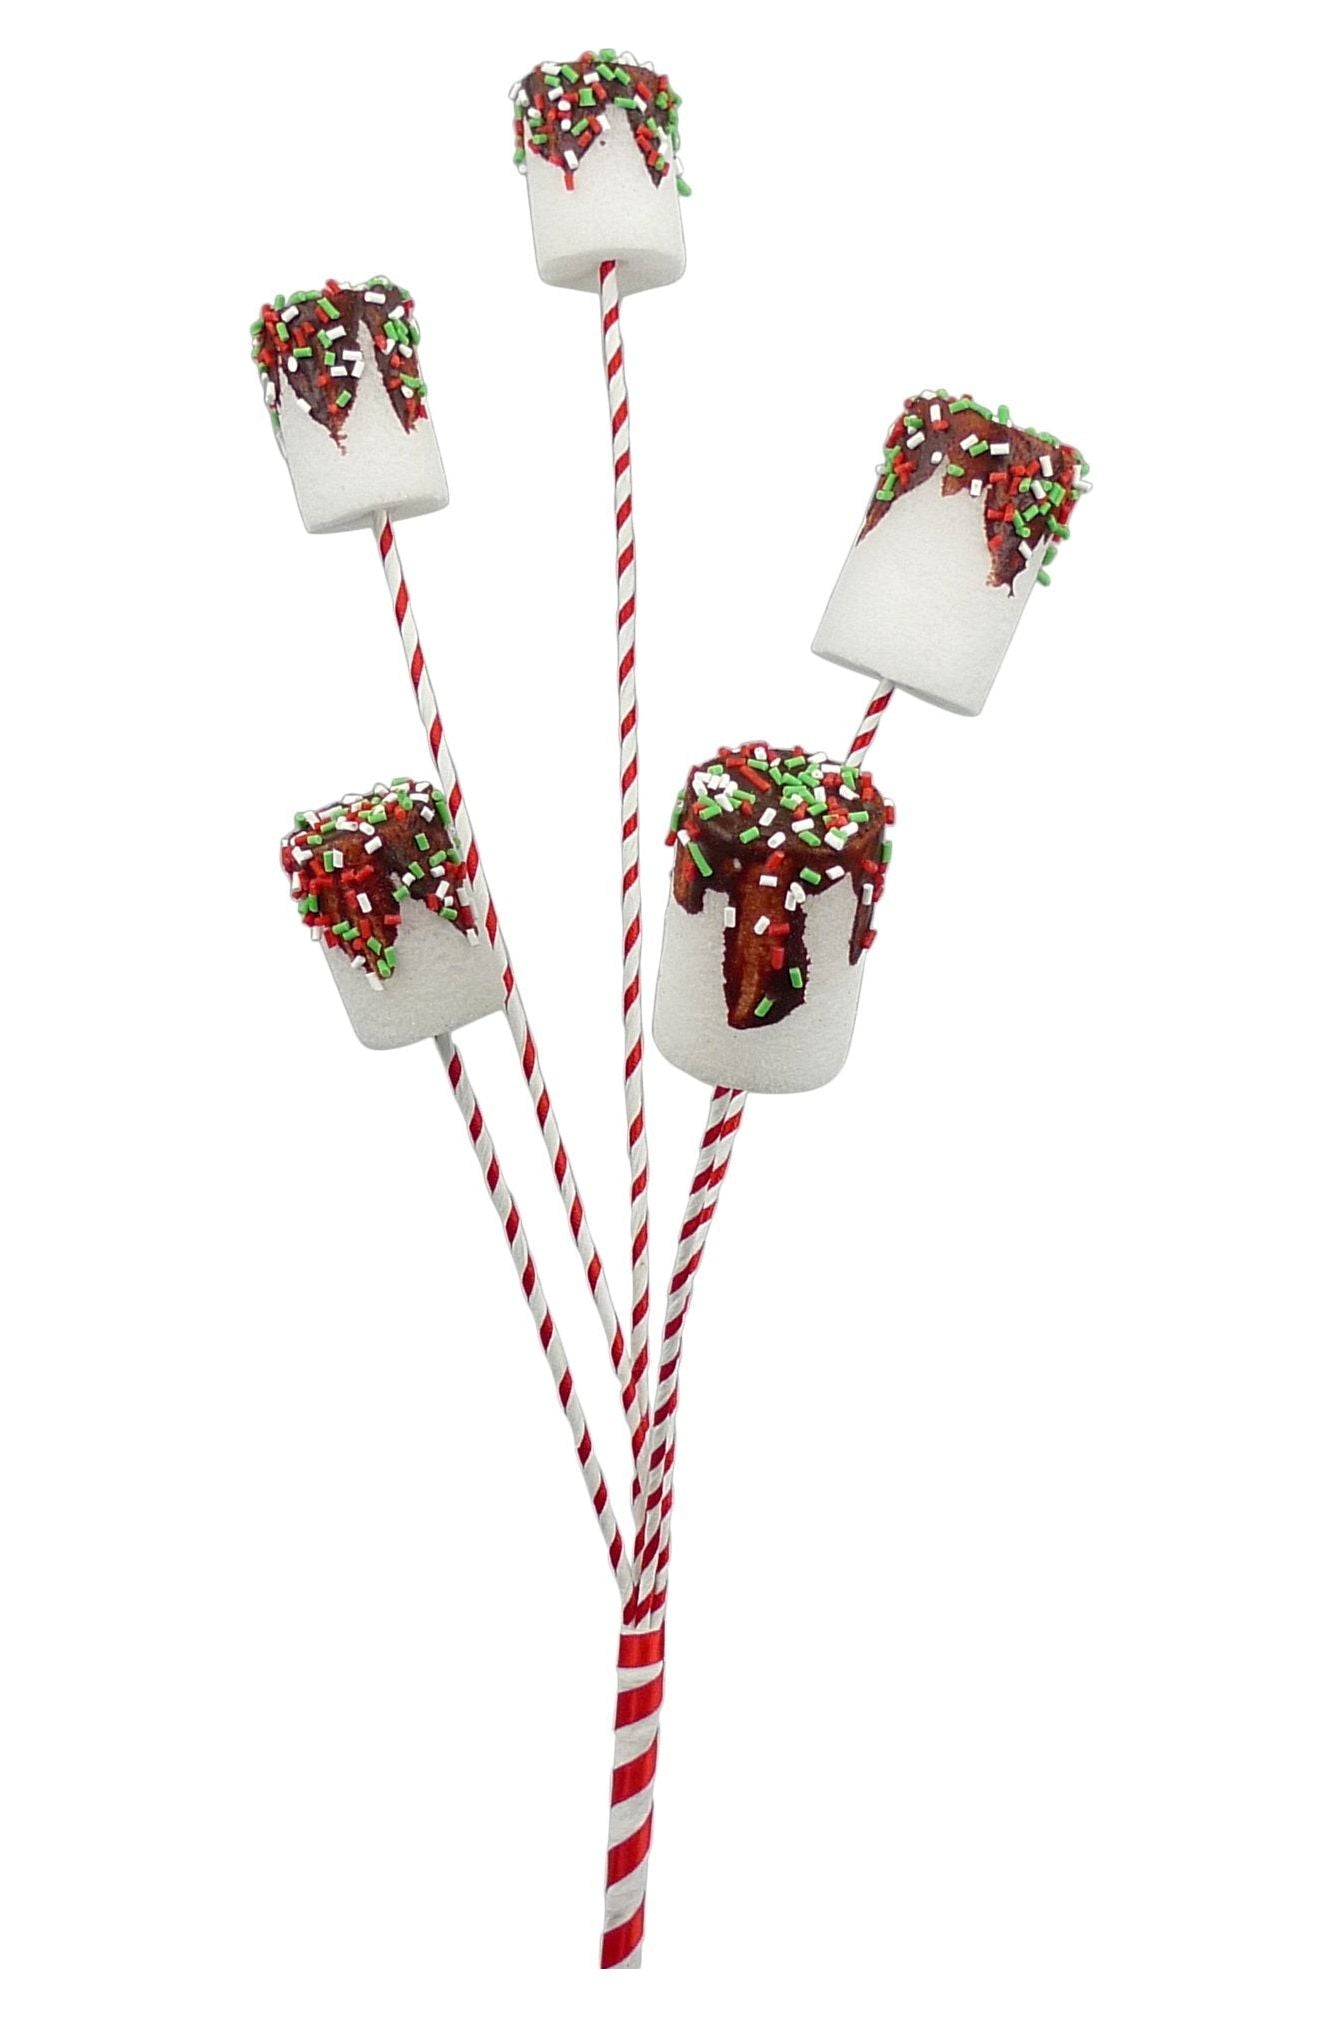 Shop For 20" Chocolate Dipped Marshmallow Pick 84792SP20